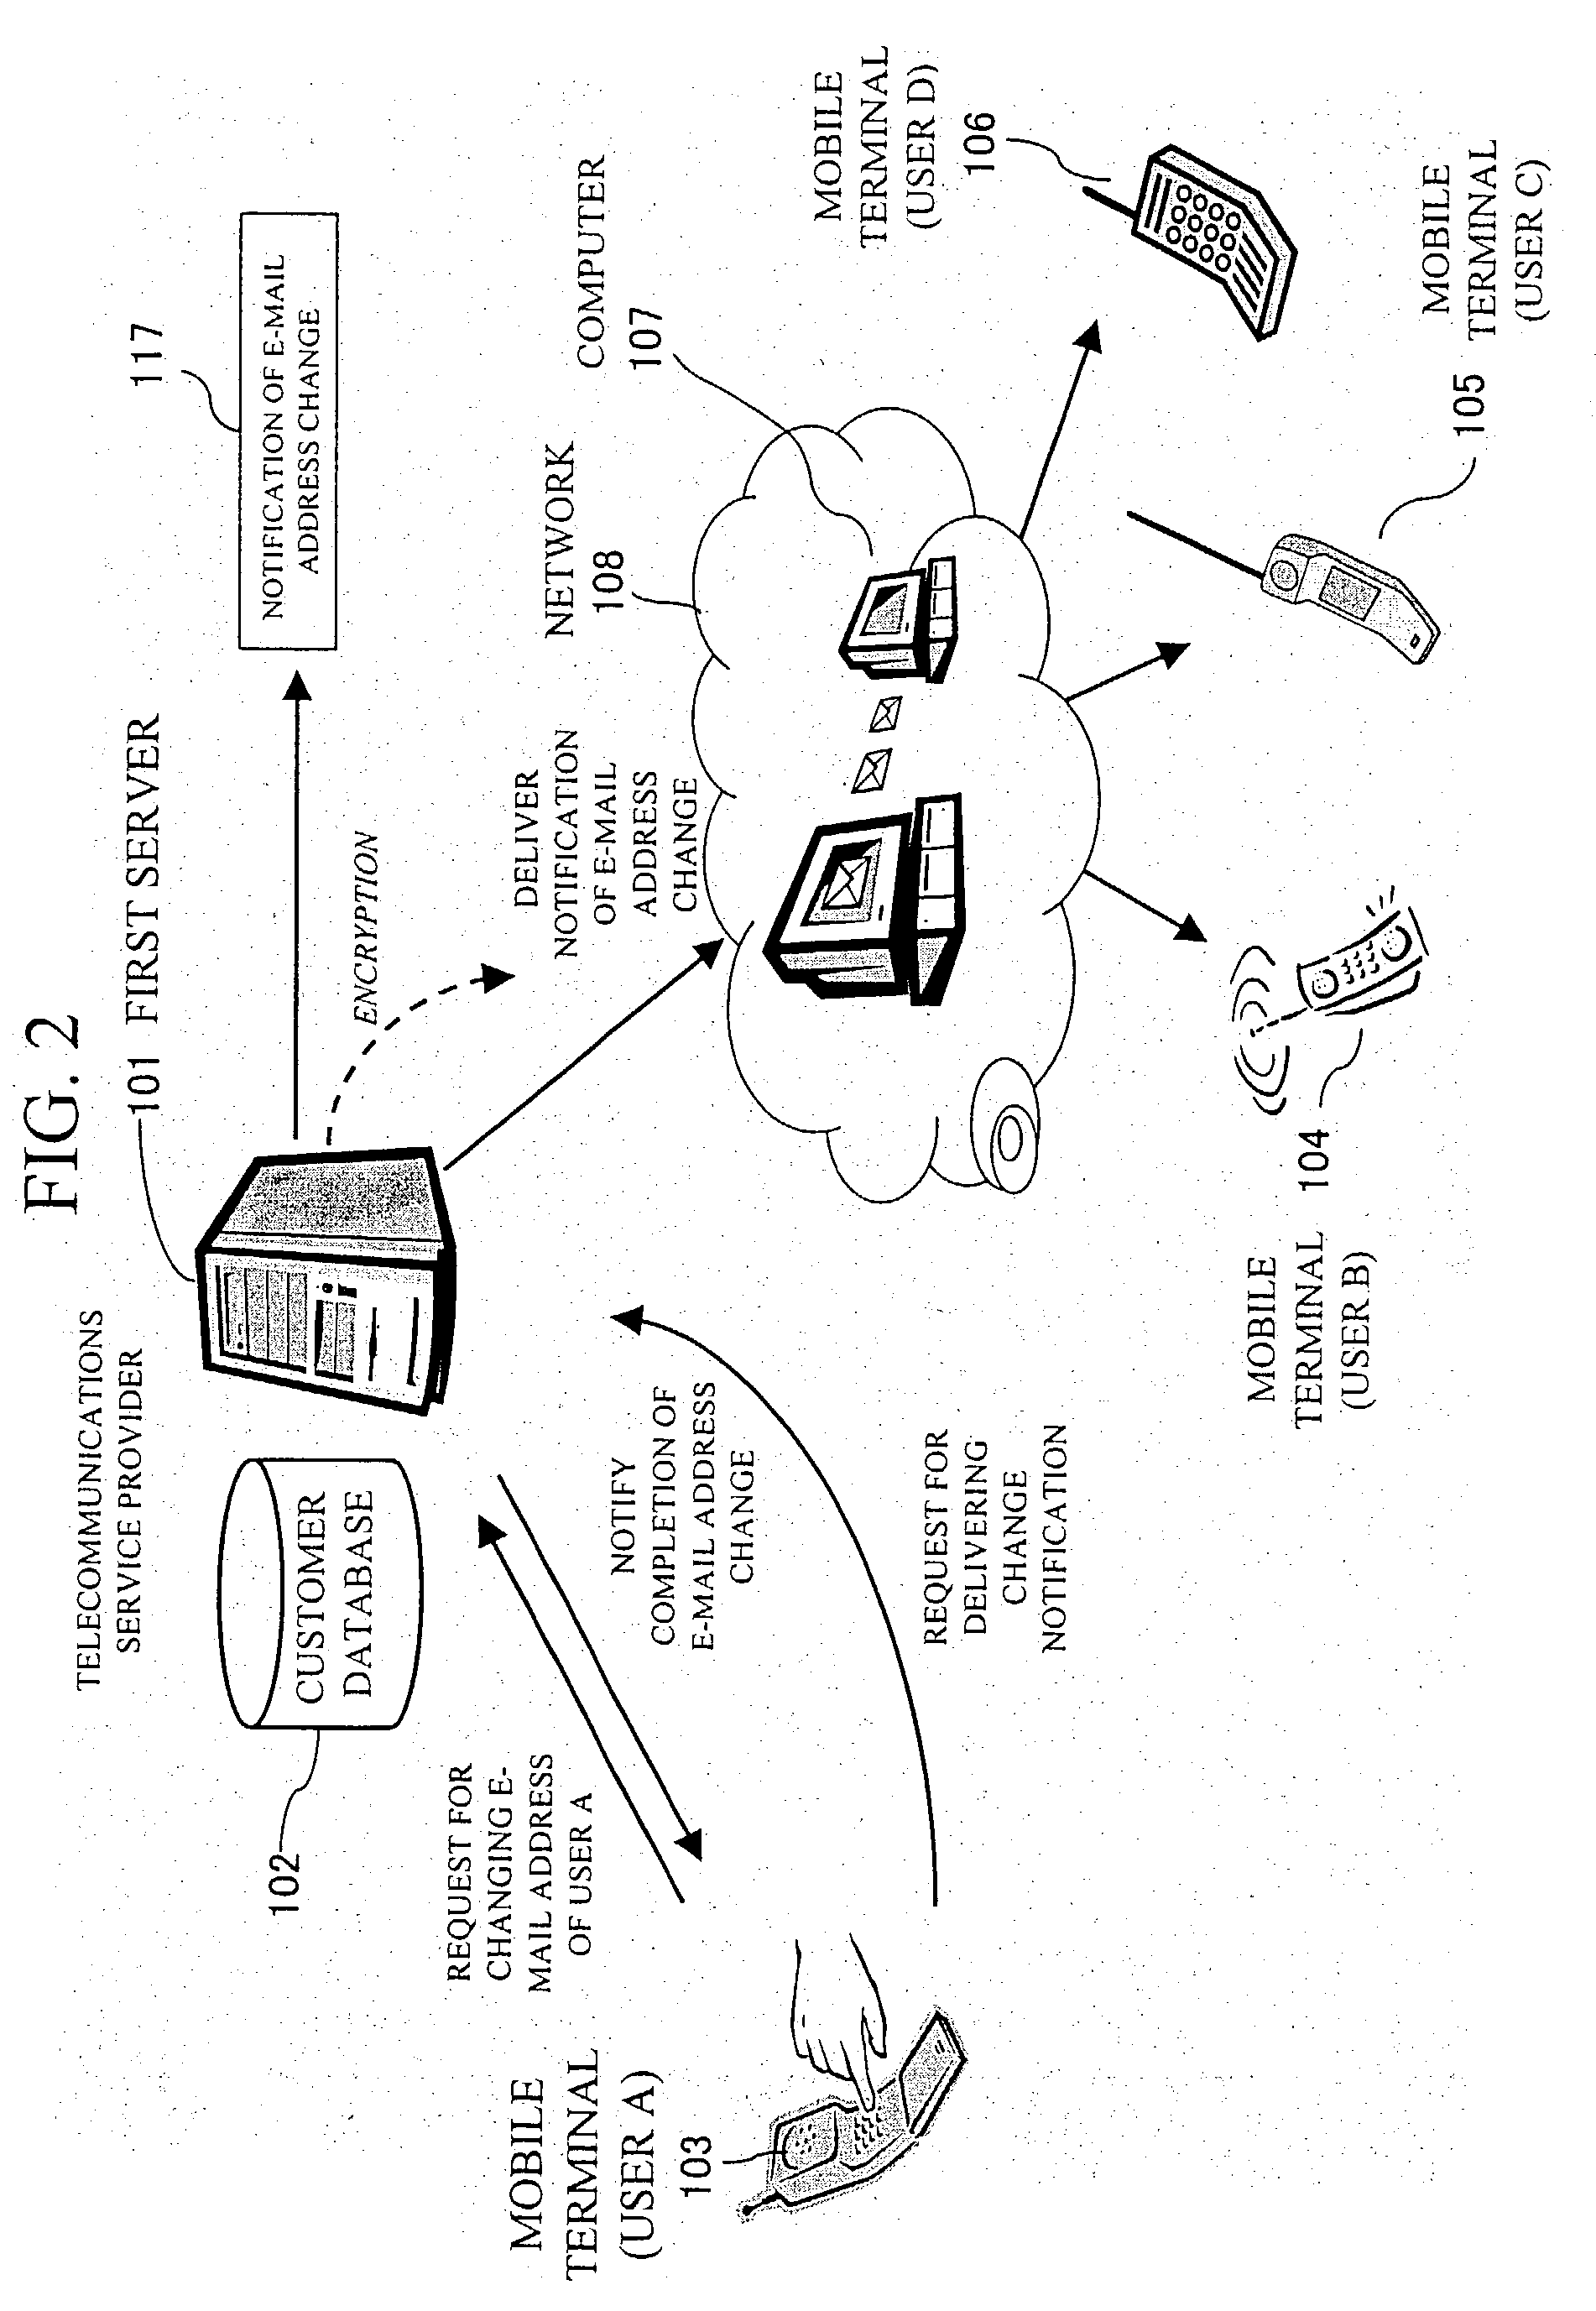 System and method for automatically changing user data